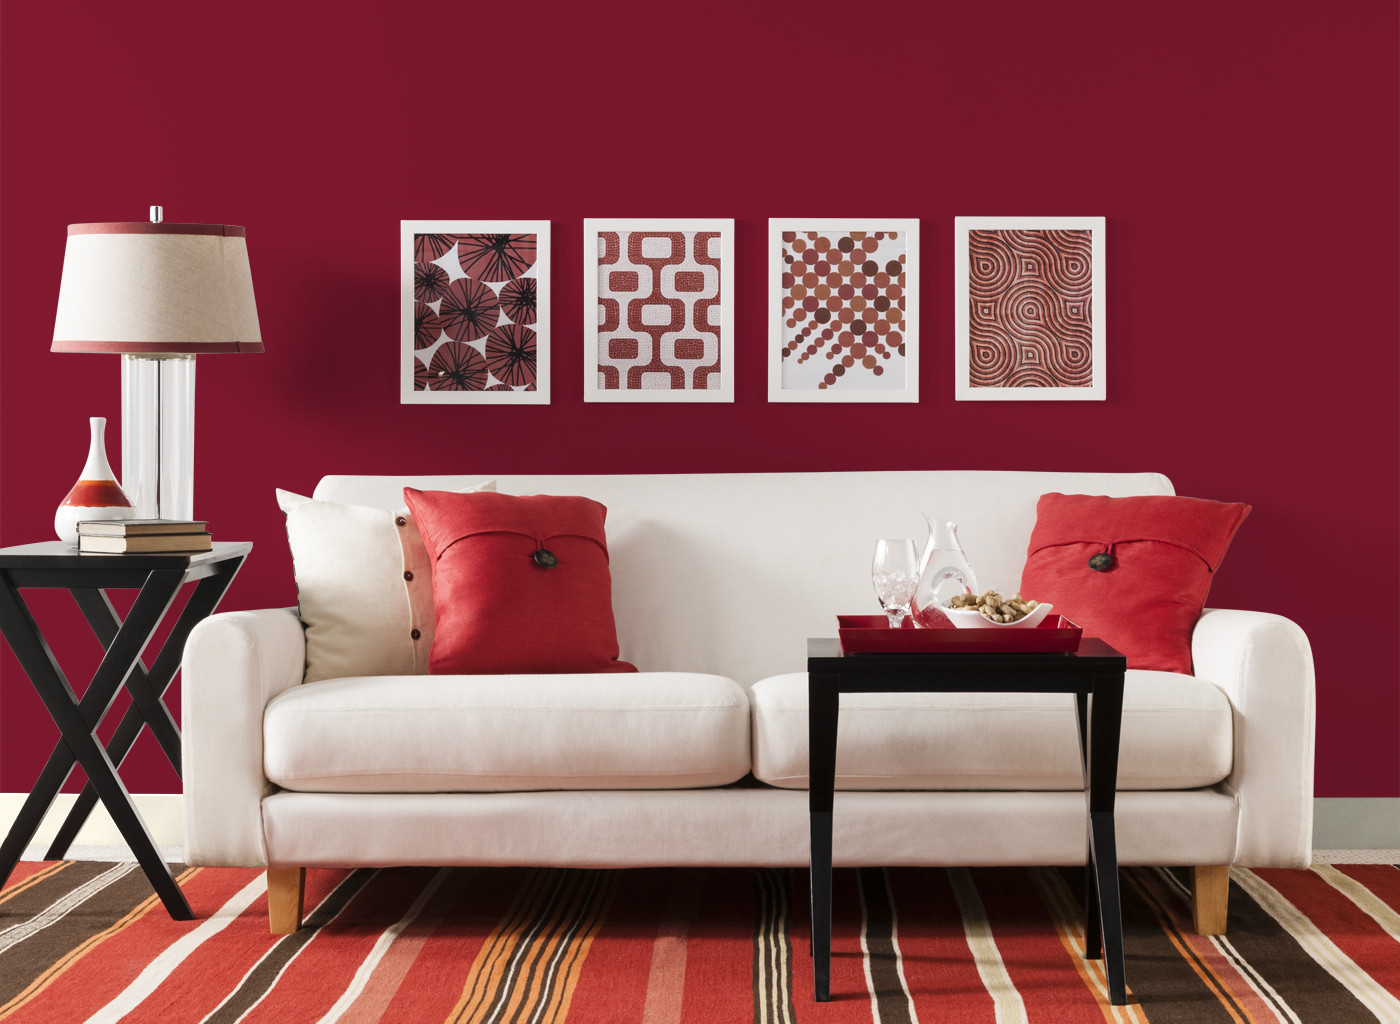 Best Living Room Paint Colors
 Best Paint Color for Living Room Ideas to Decorate Living